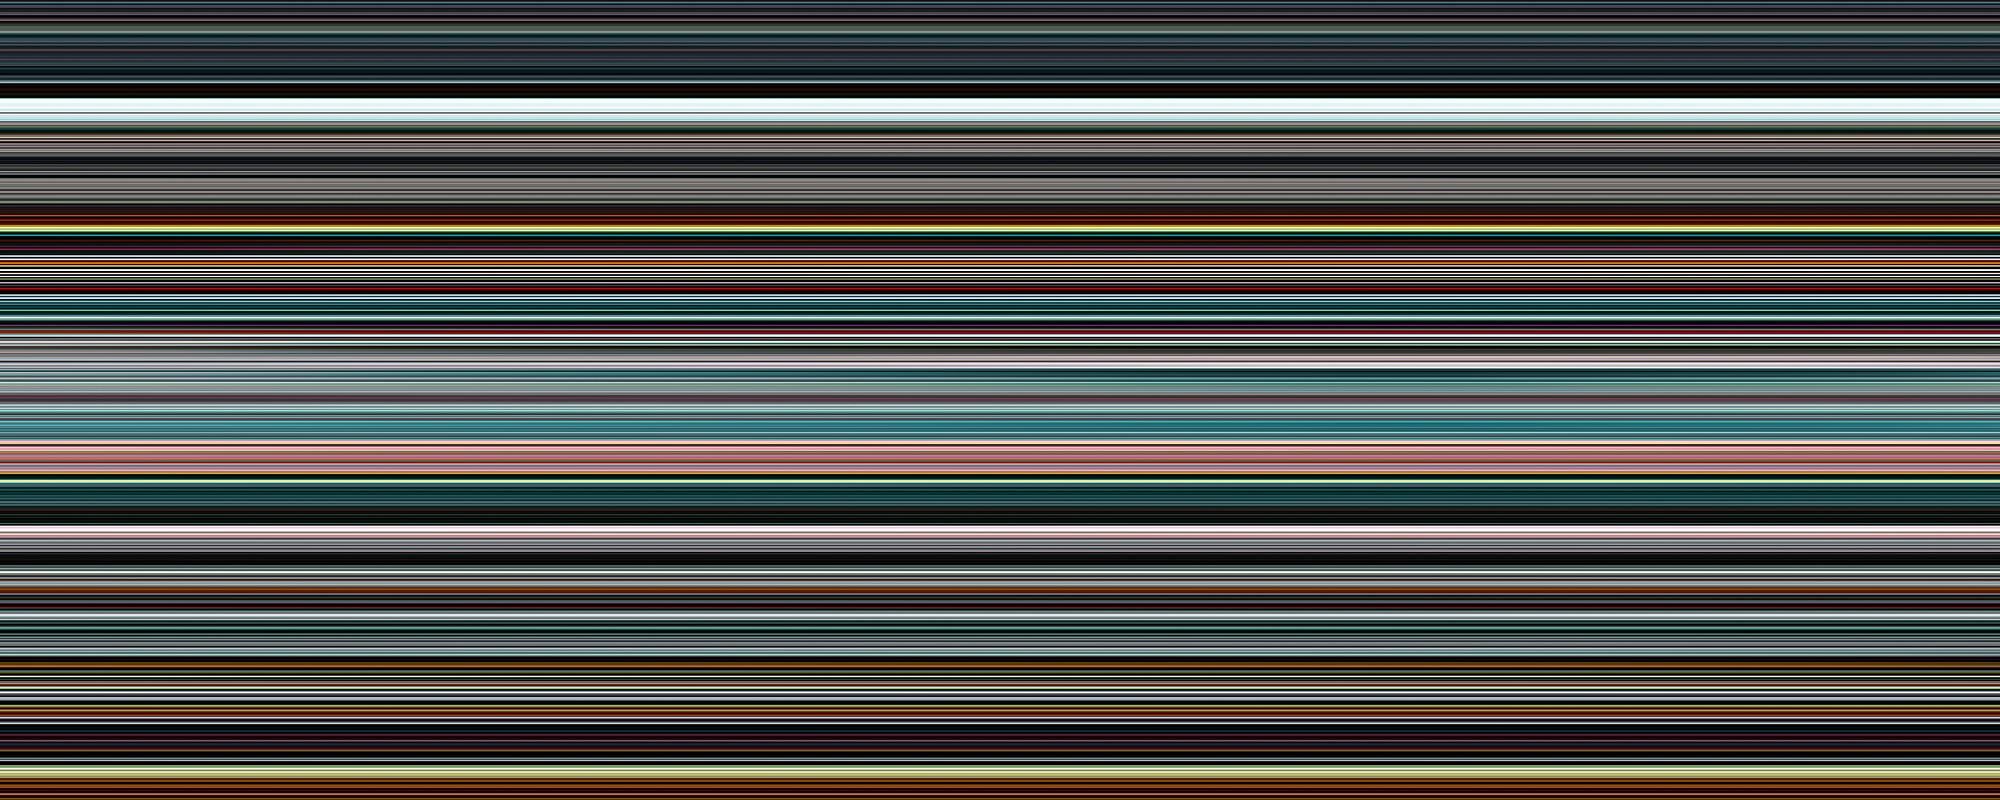 Jens-Christian Wittig Abstract Photograph - Stripes Pensum Unlimited